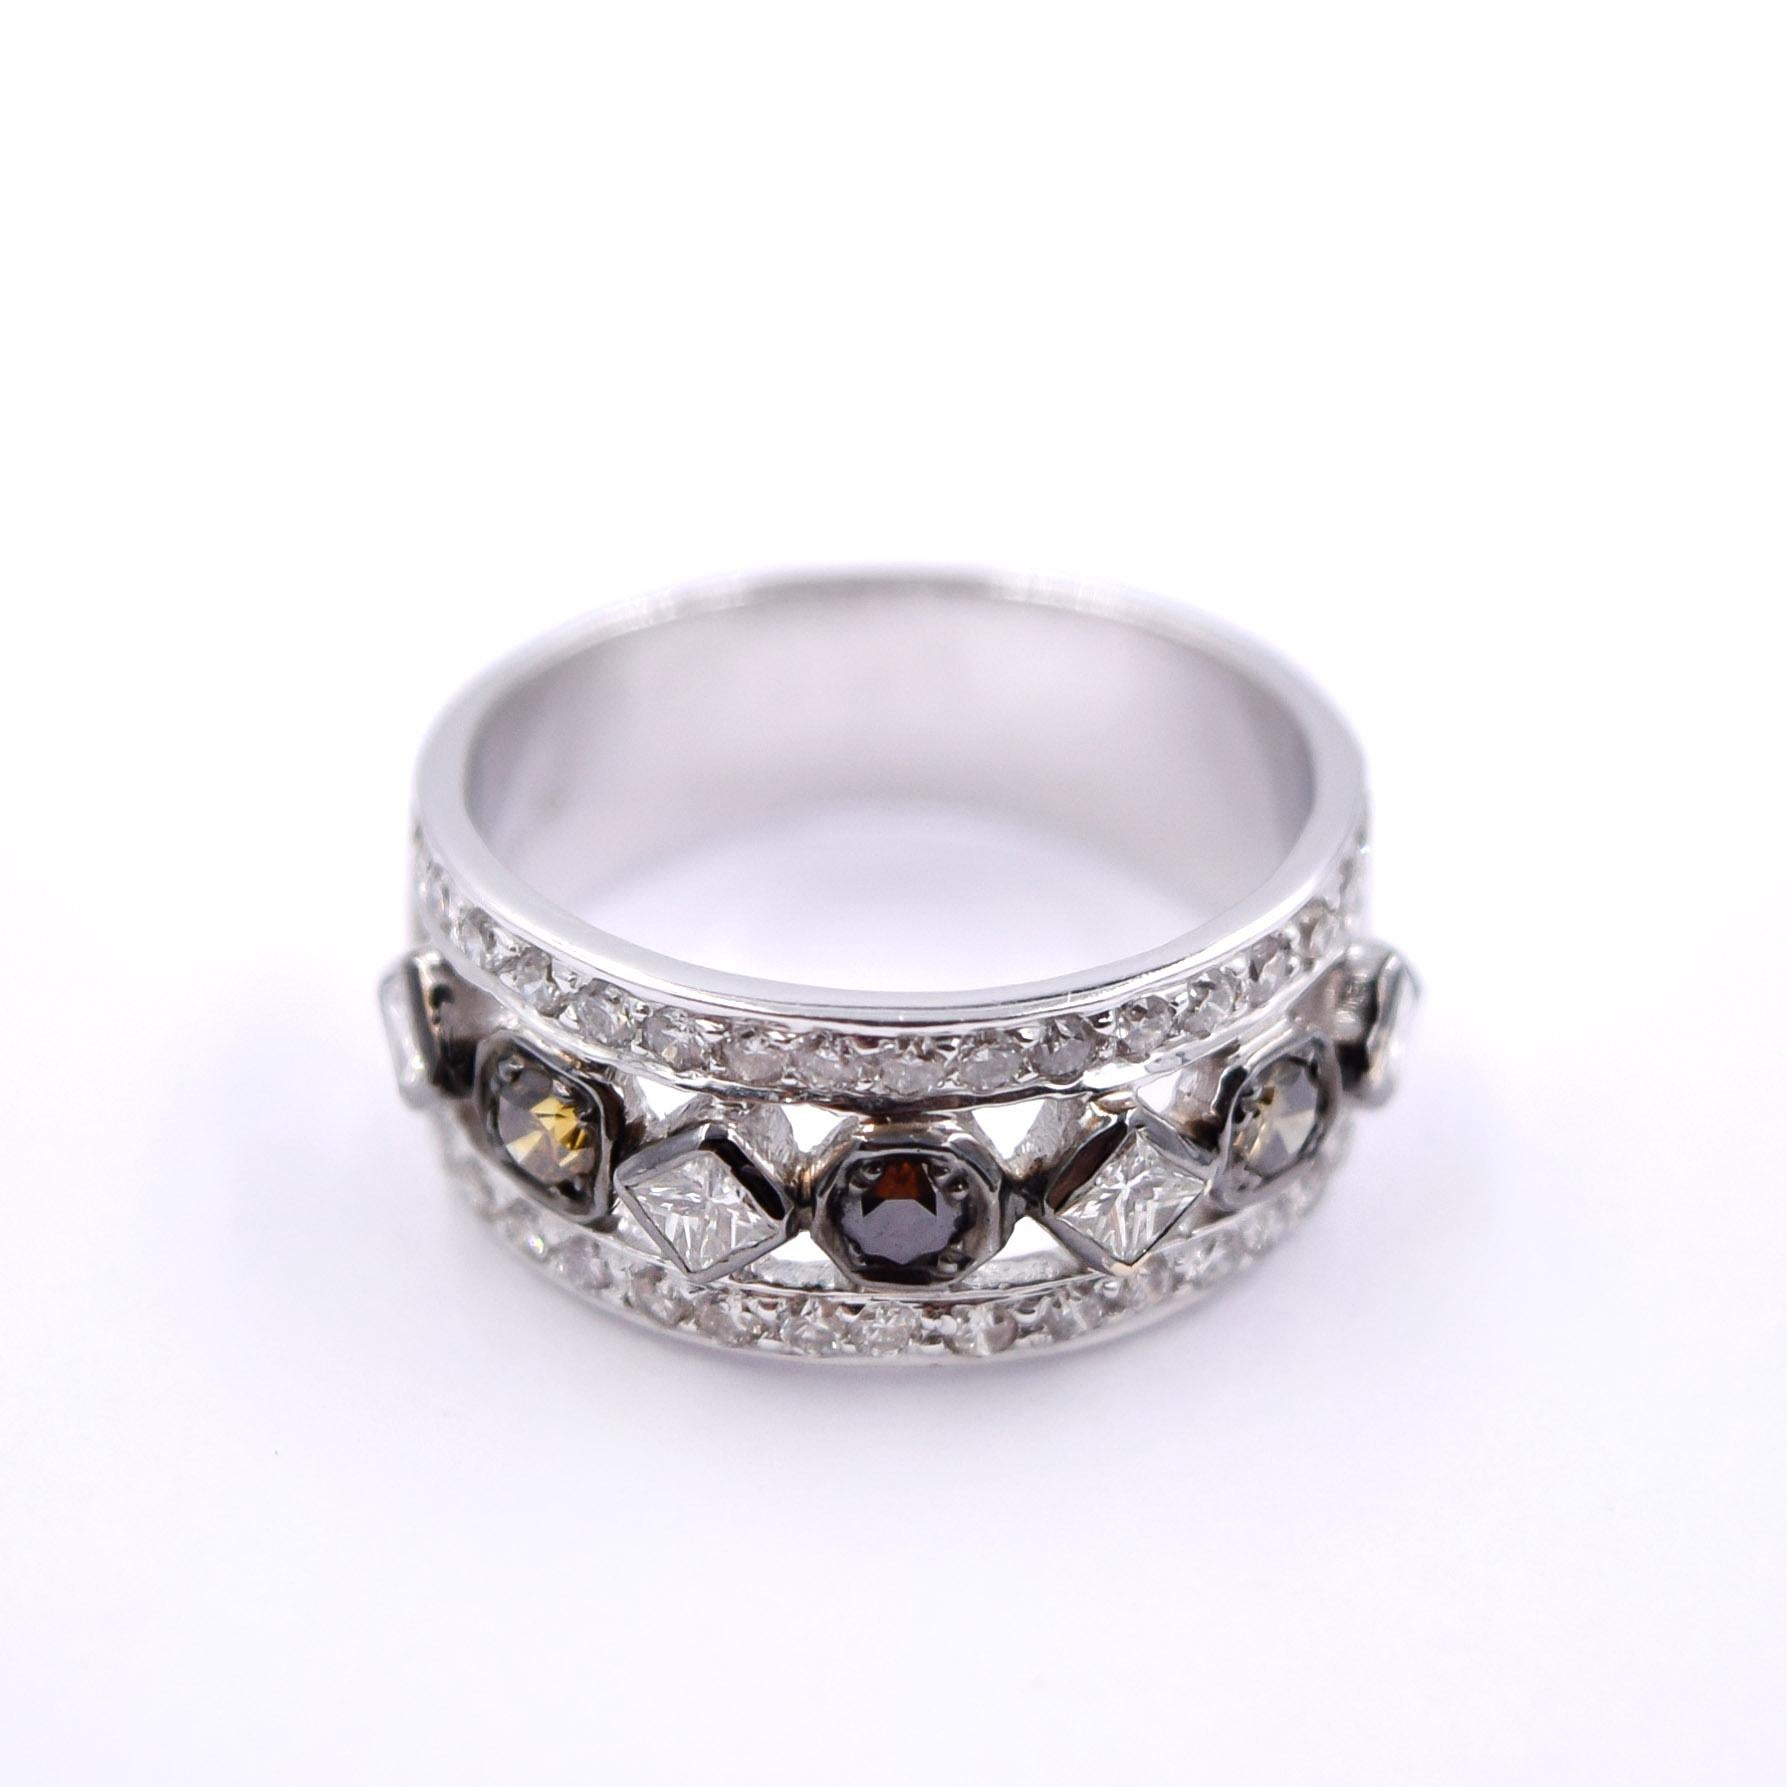 Beautiful multicolored diamond deco band by Sethi Couture.

This ring features a row of multicolored princess cut white diamonds and round diamonds with colors of yellow and brown. Small round white diamonds surround the center row, bringing the